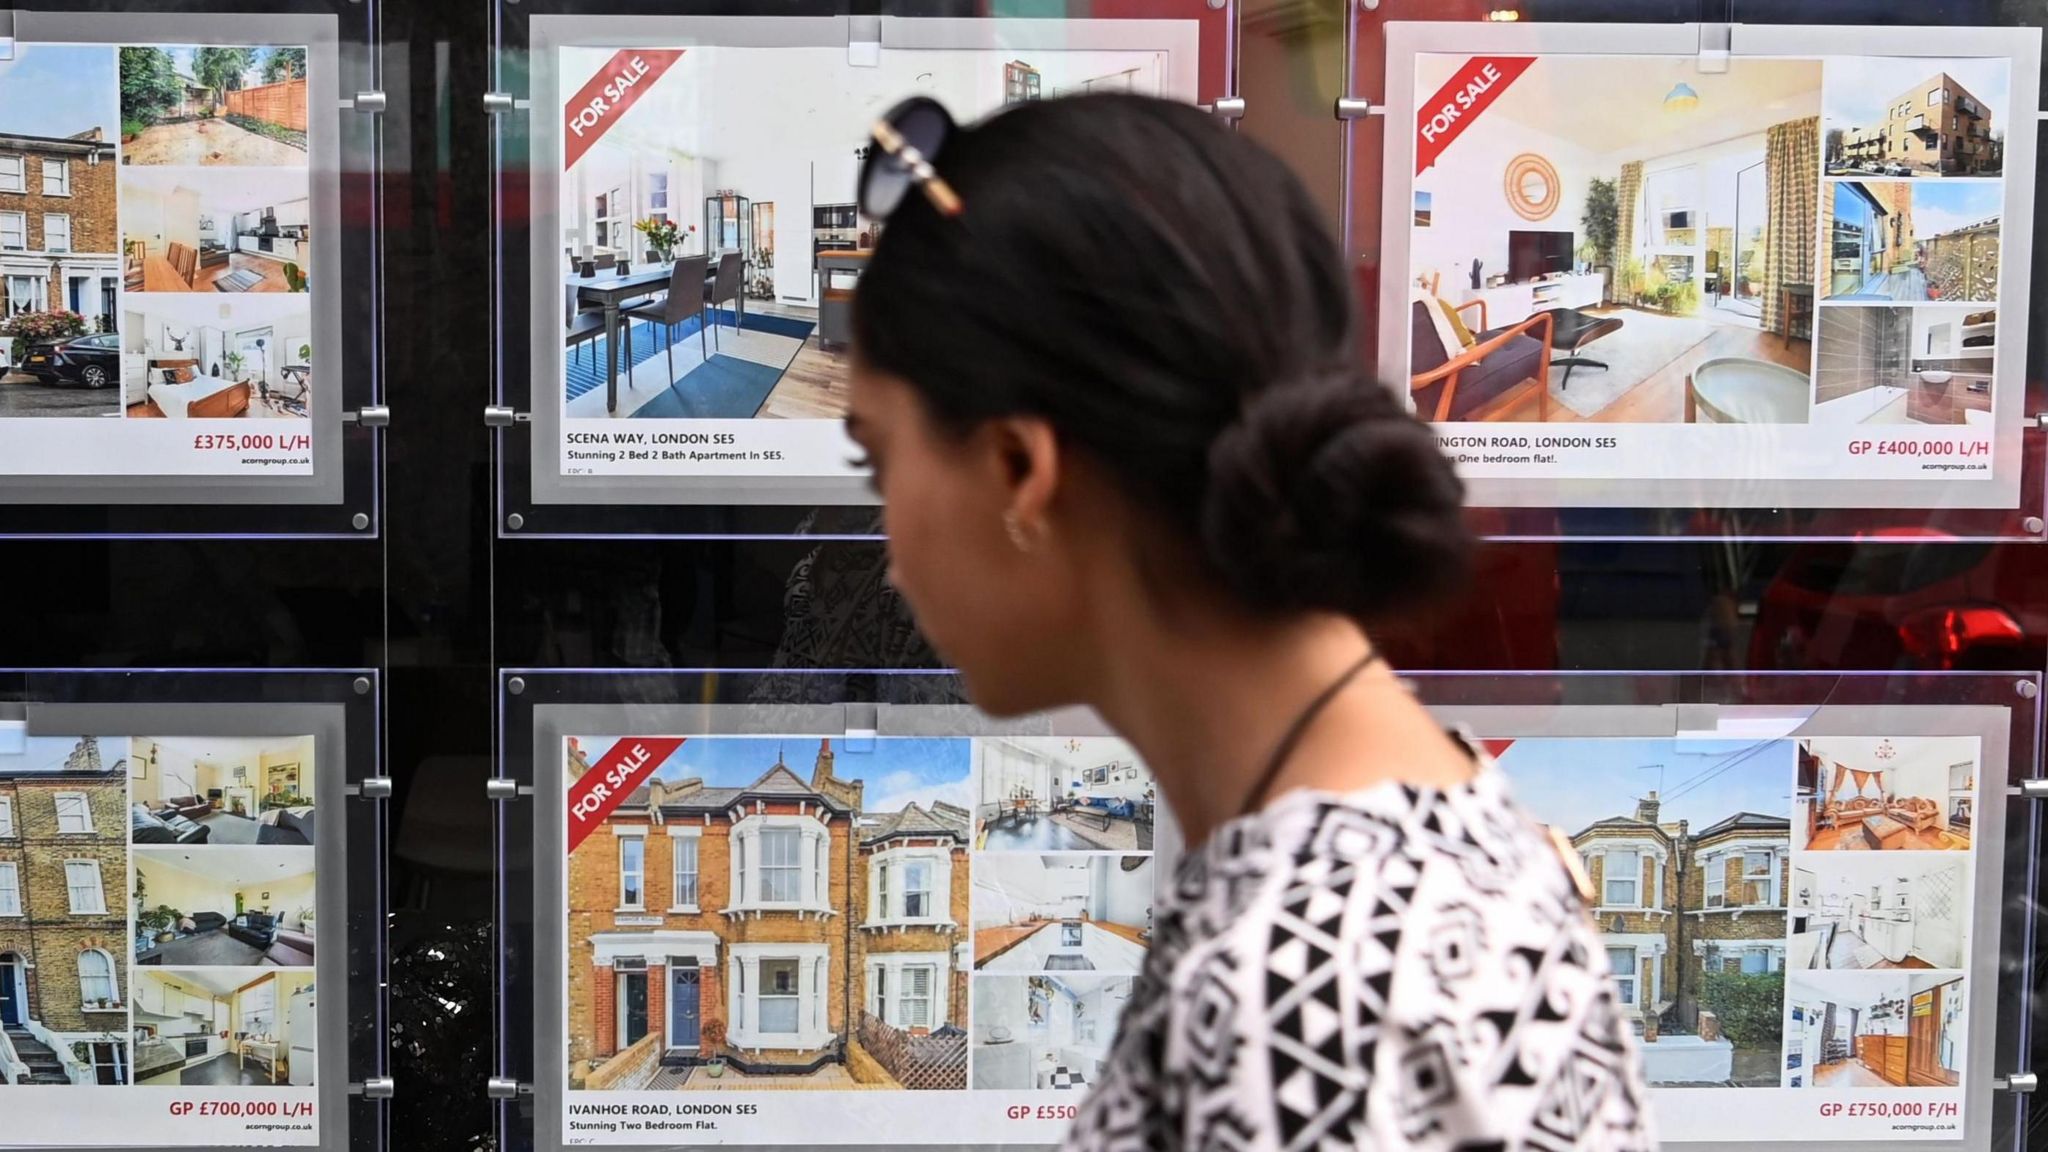 A woman looks at house for sale signs in an estate agents window